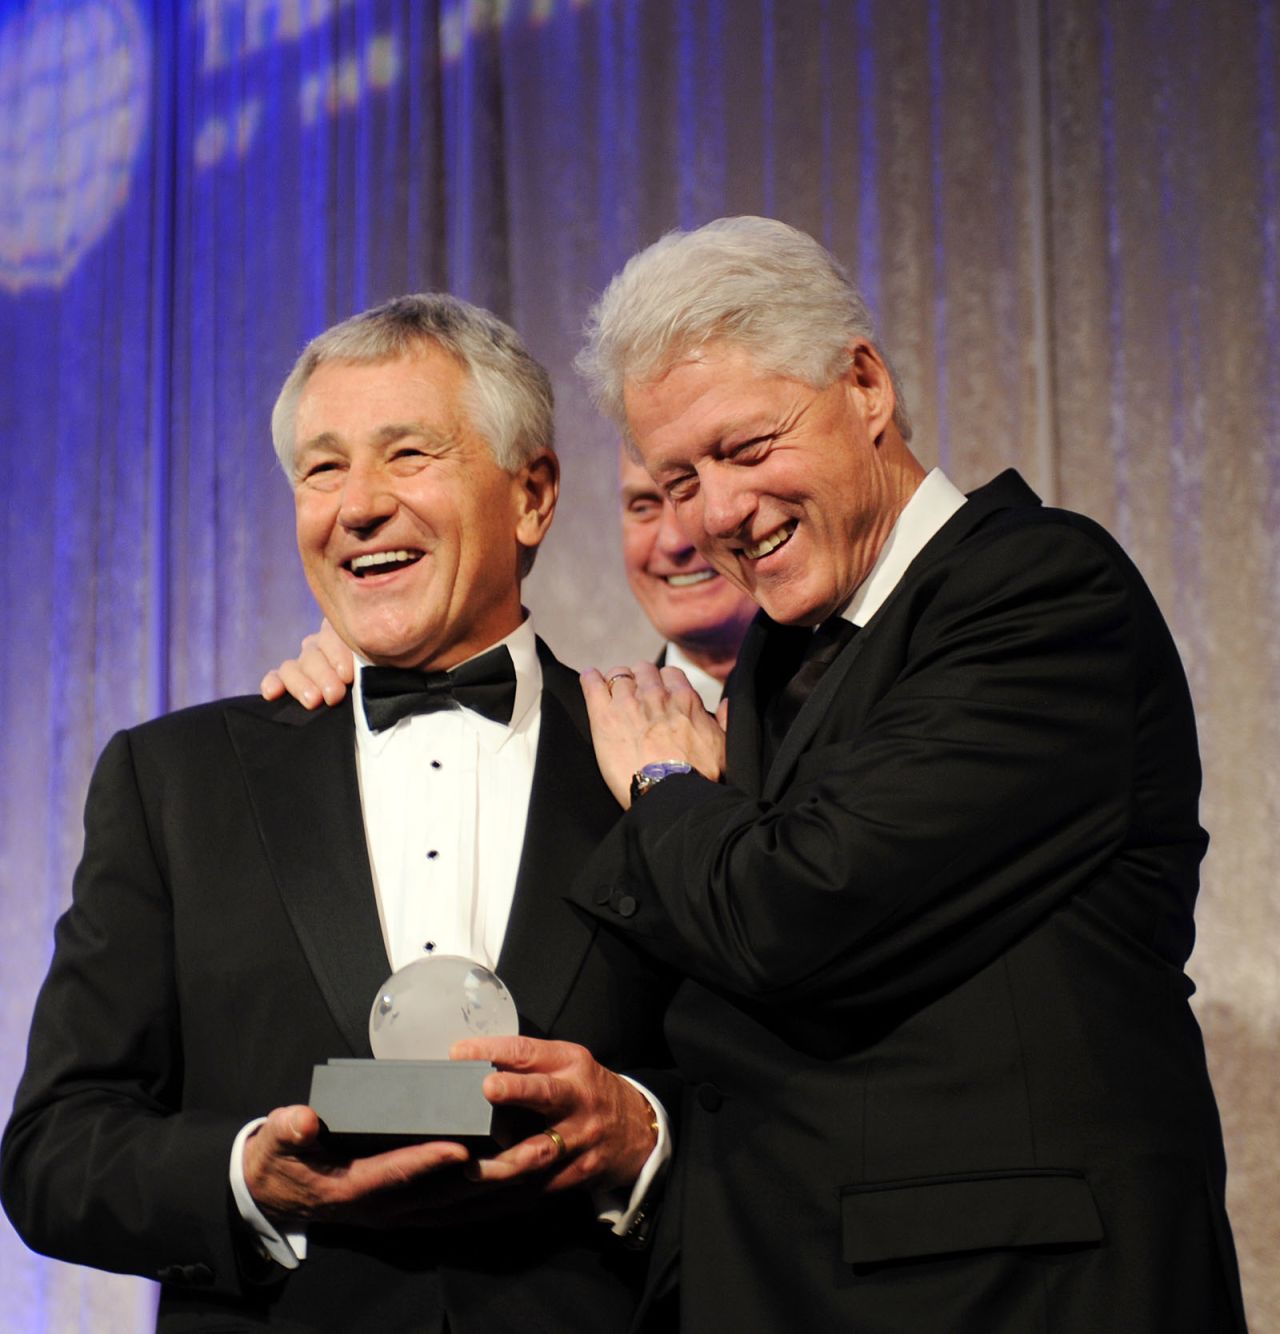 Hagel presents former President Bill Clinton with the Atlantic Council's Distinguished International Leadership Award in Washington in April 2010. 